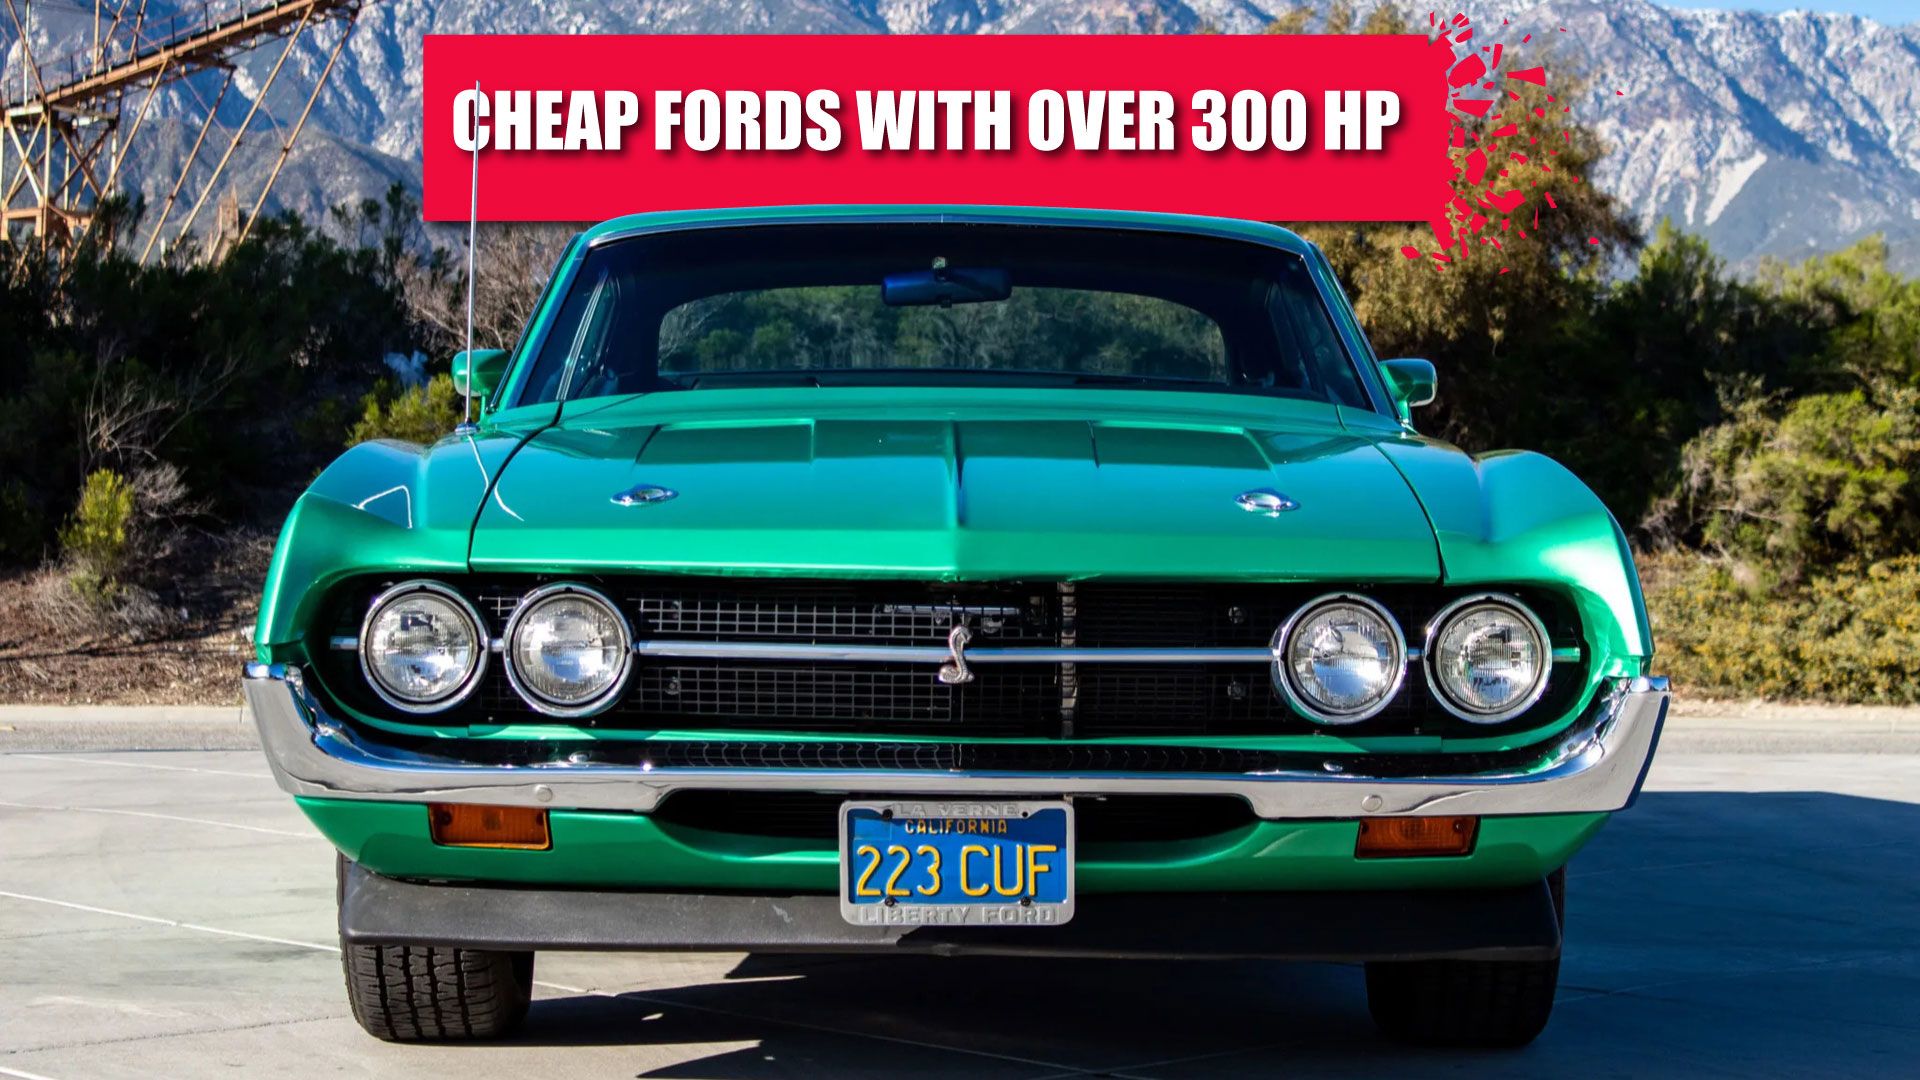 Ford Torino Featured Image